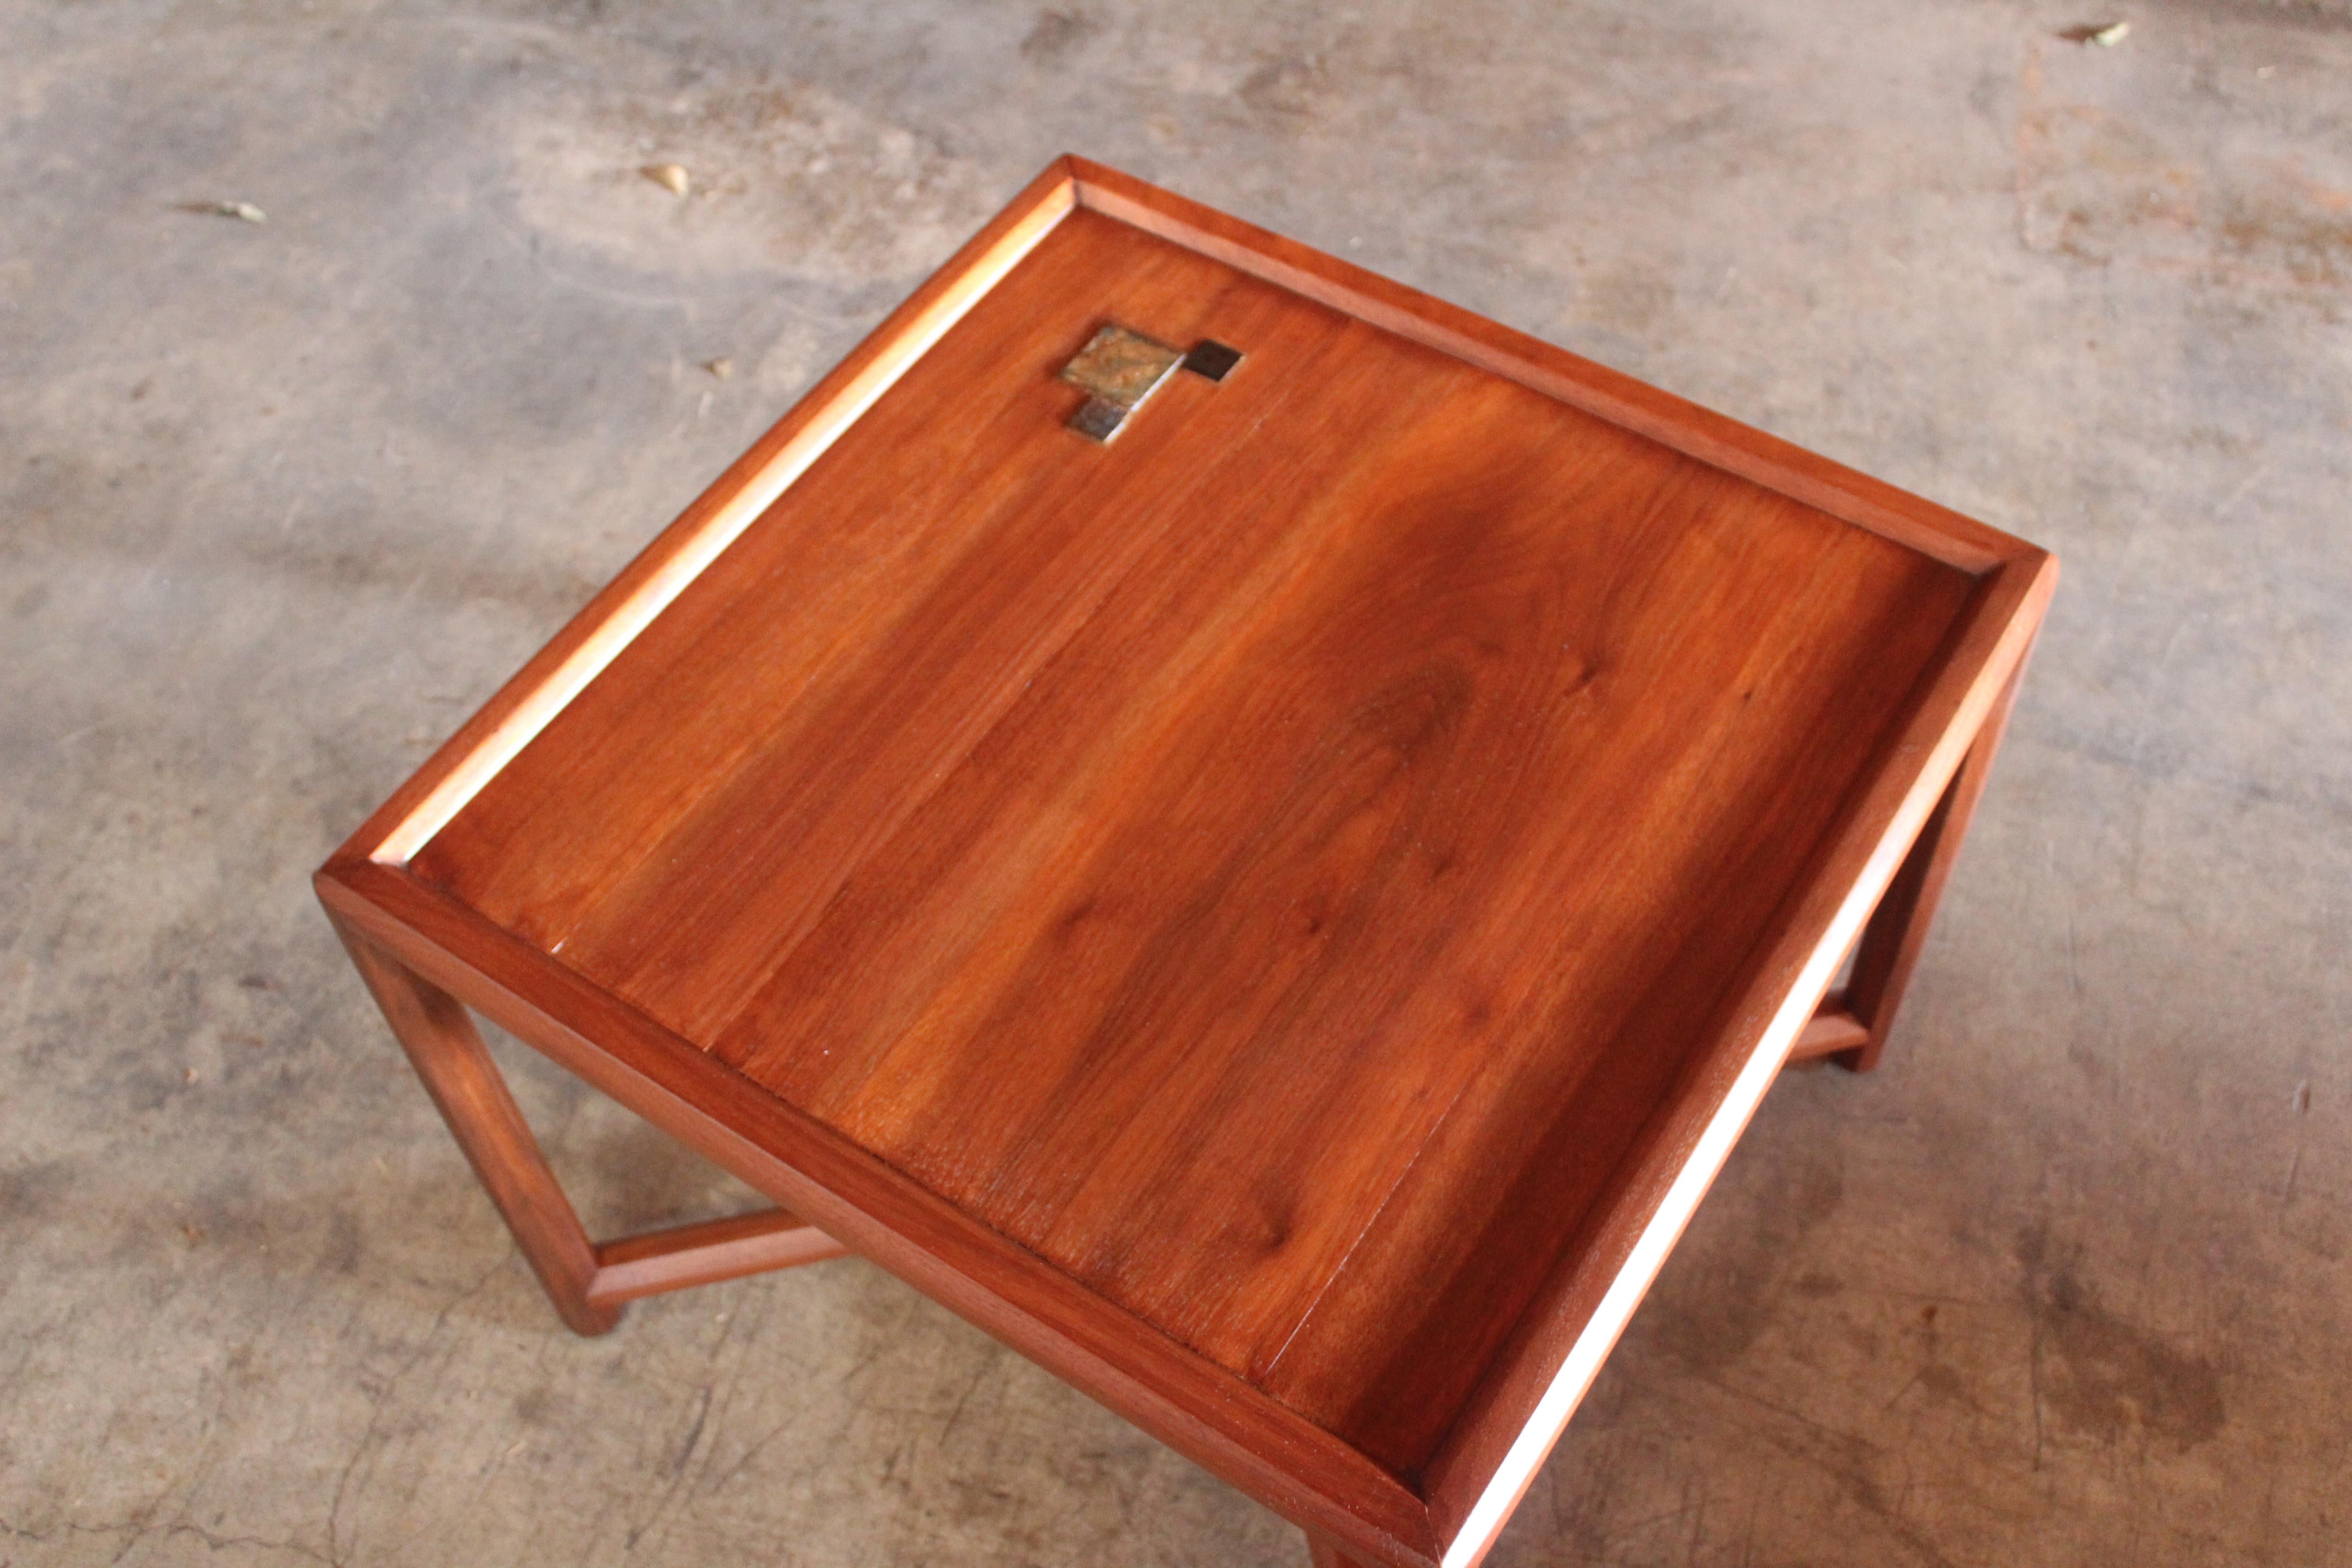 American Walnut End Table with Tiffany Tiles by Edward Wormley for Dunbar, 1950s For Sale